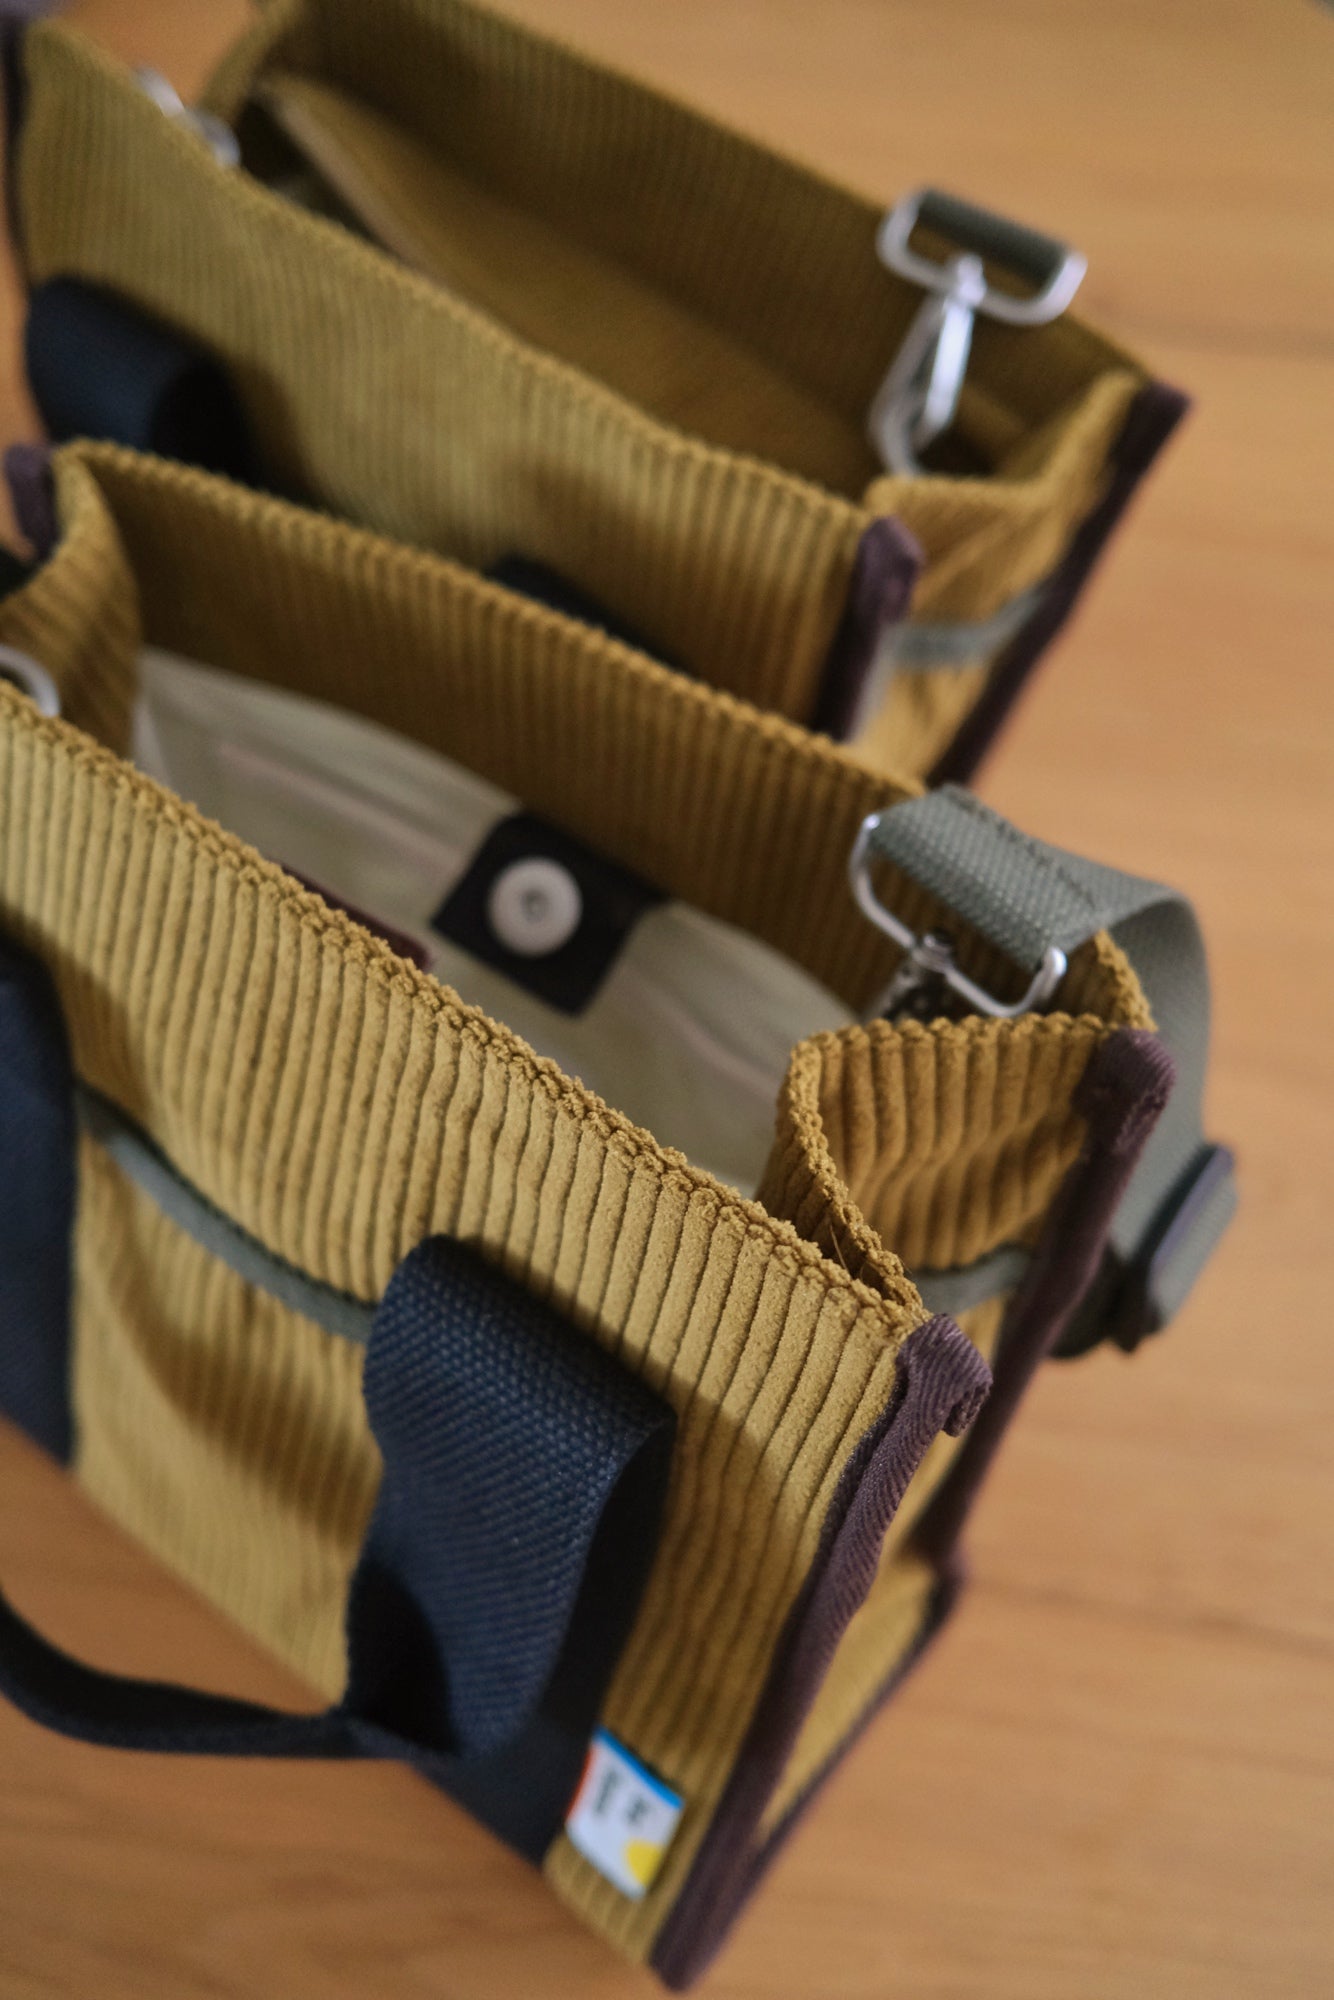 New: Analog No.31 Medium Tote Bag (Limited Edition) - Water Repellent Corduroy.